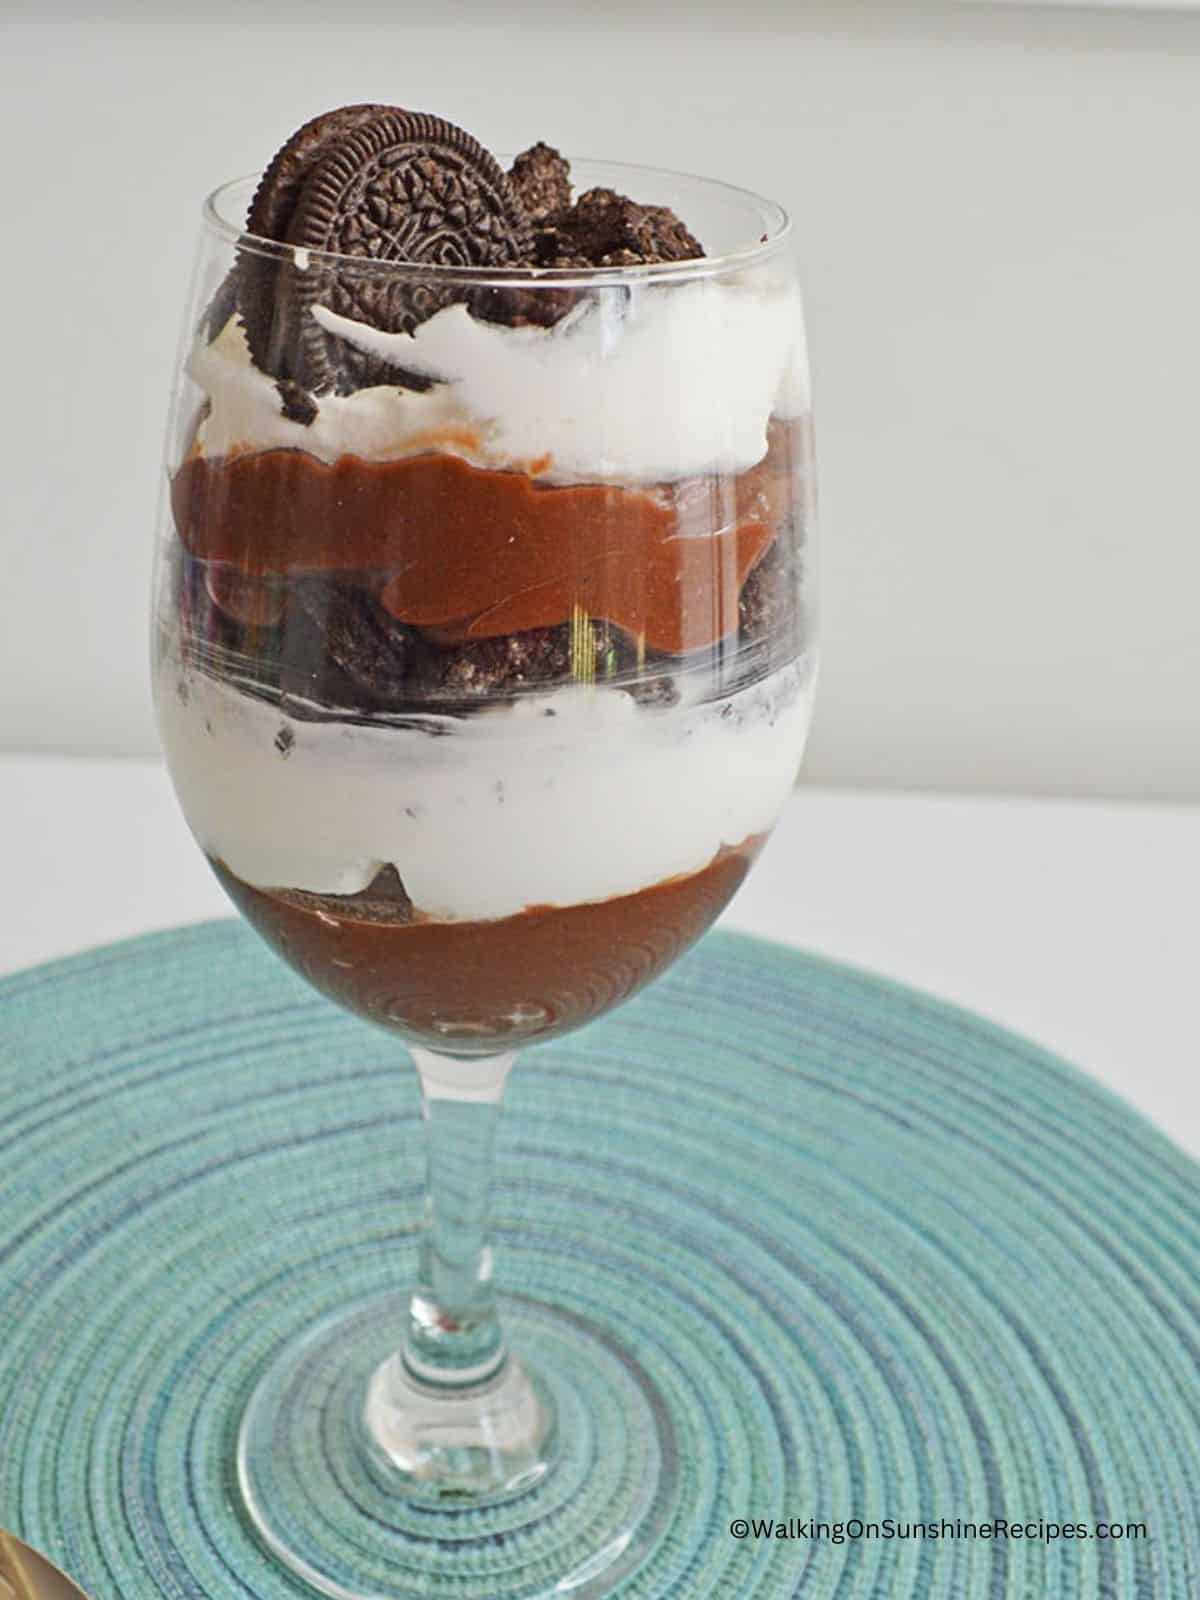 Oreo pudding parfait in clear glass on aqua placemat.